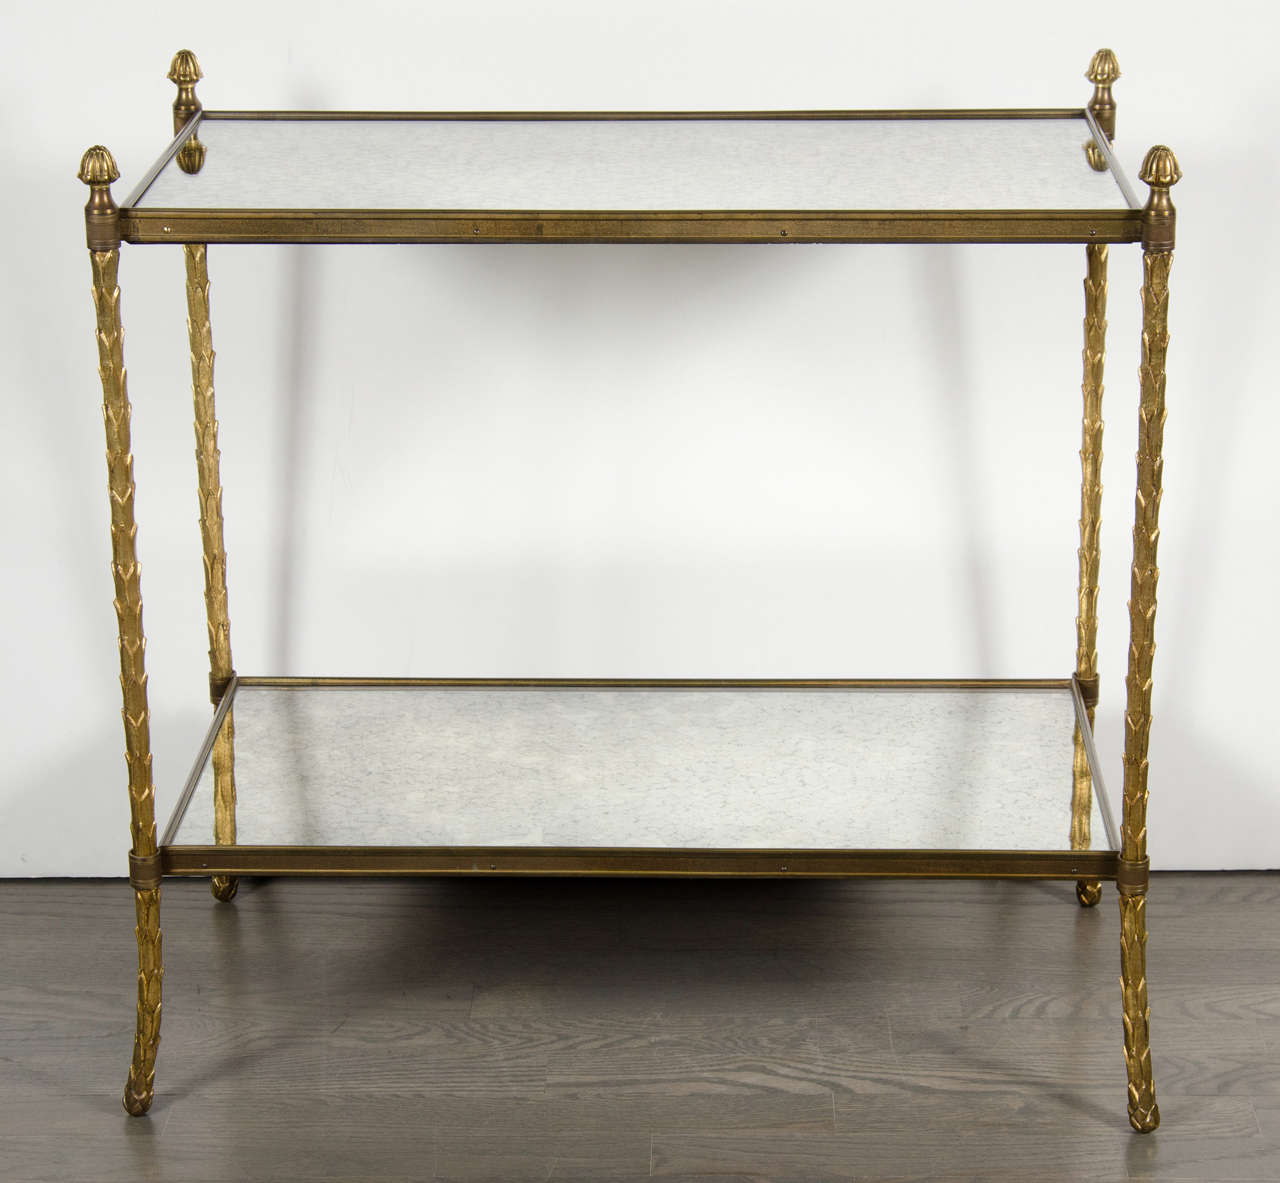 This luxurious Bagues Gilt Bronze two-tiered table features a frame in a stylized foliage design in a naturalistic form with tapered legs and antiqued mirror shelves.